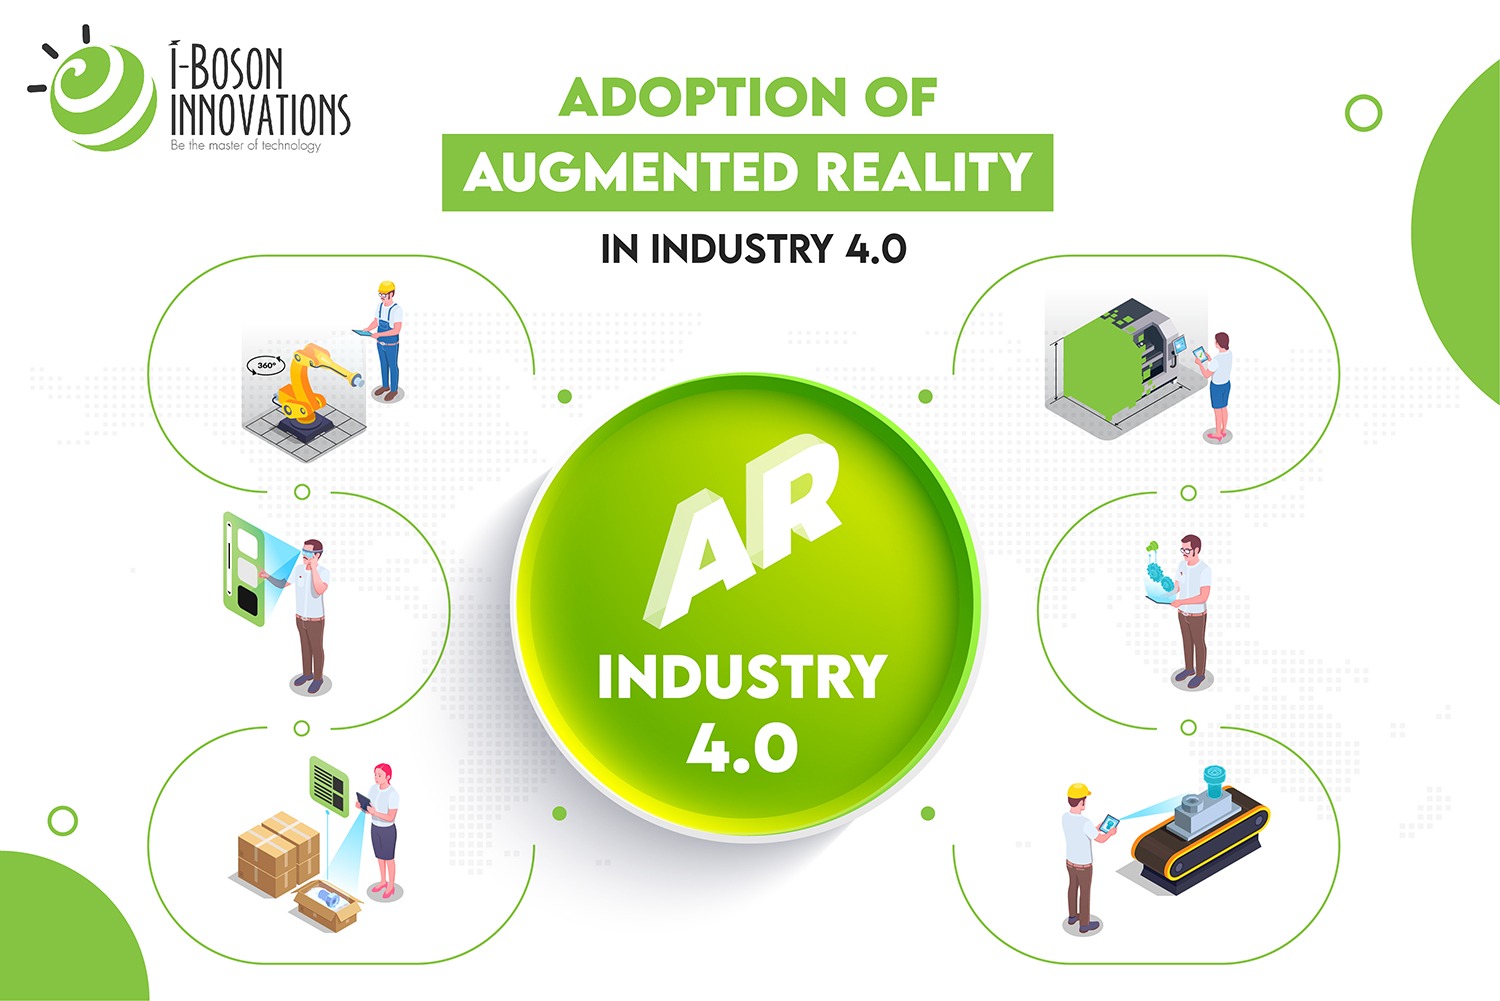 Adoption of augmented reality in industry 4.0
                       